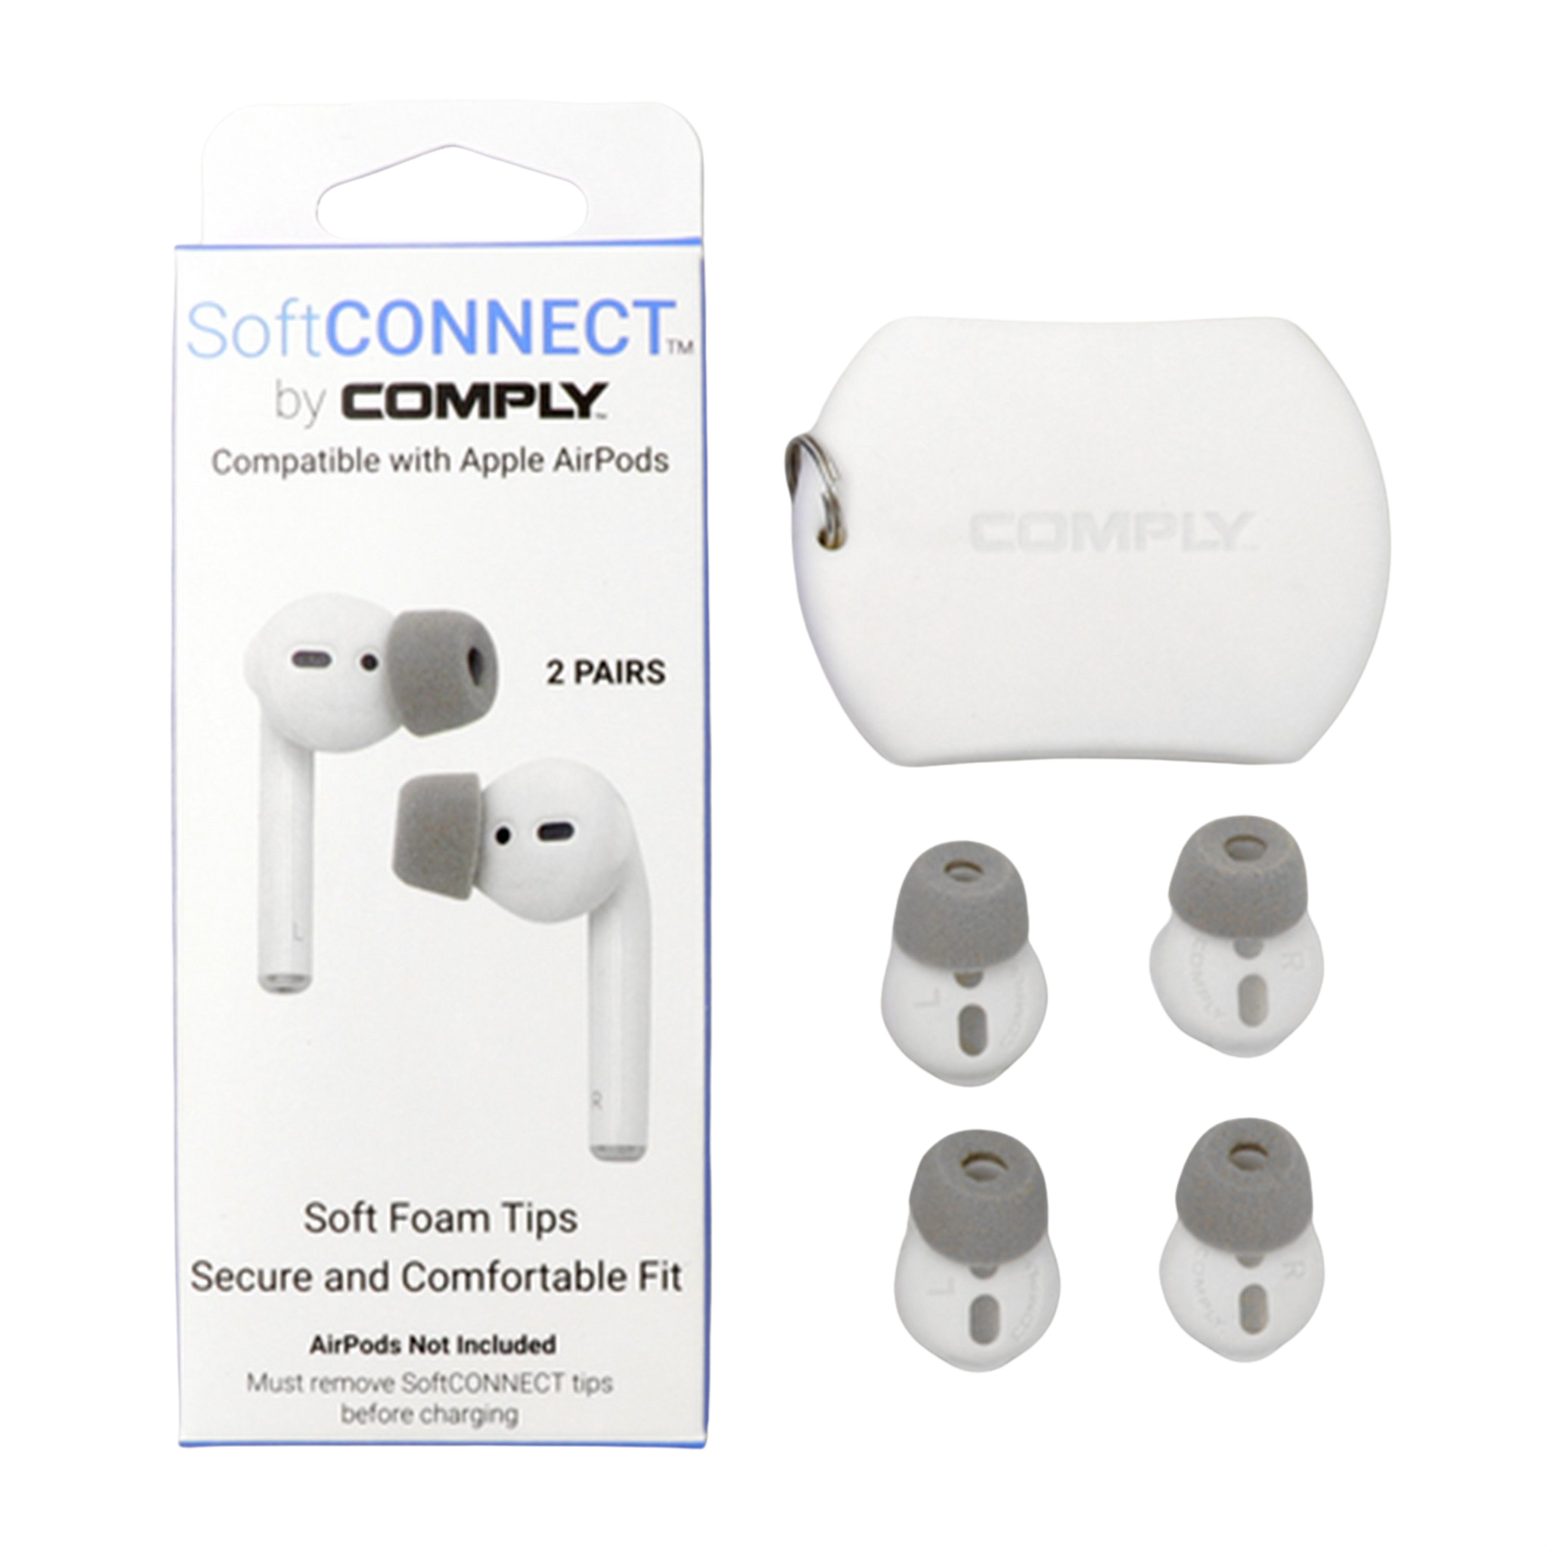 Comply SoftCONNECT Foam Tips for Airpods - Small (2 Pairs) - Discontinued